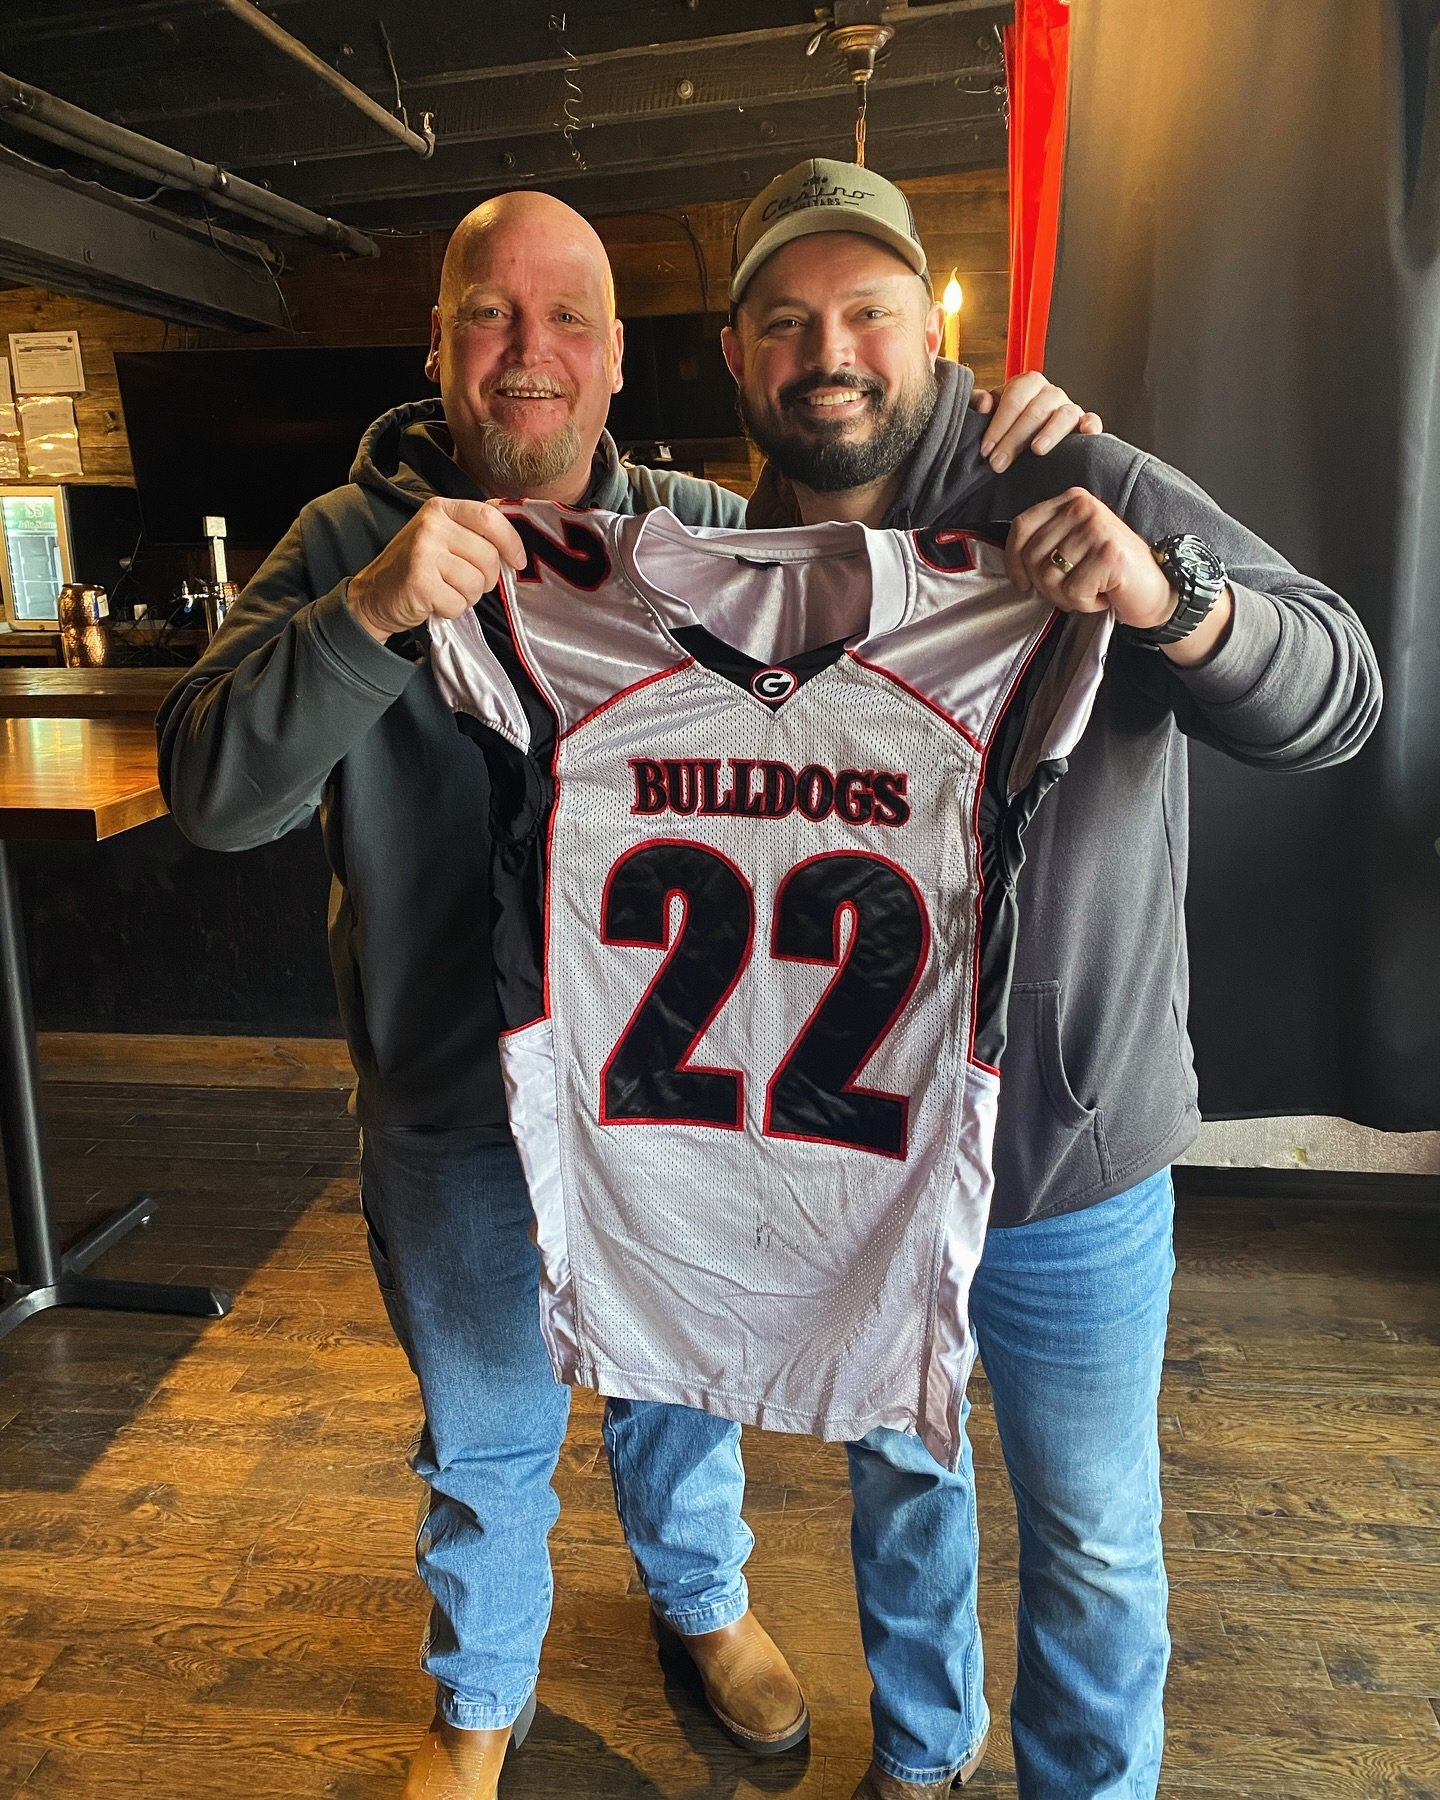 When coach surprises you at your Nashville gig with your old Jersey from back in the day! #nationalchamps #bulldogsfootball #footballfam